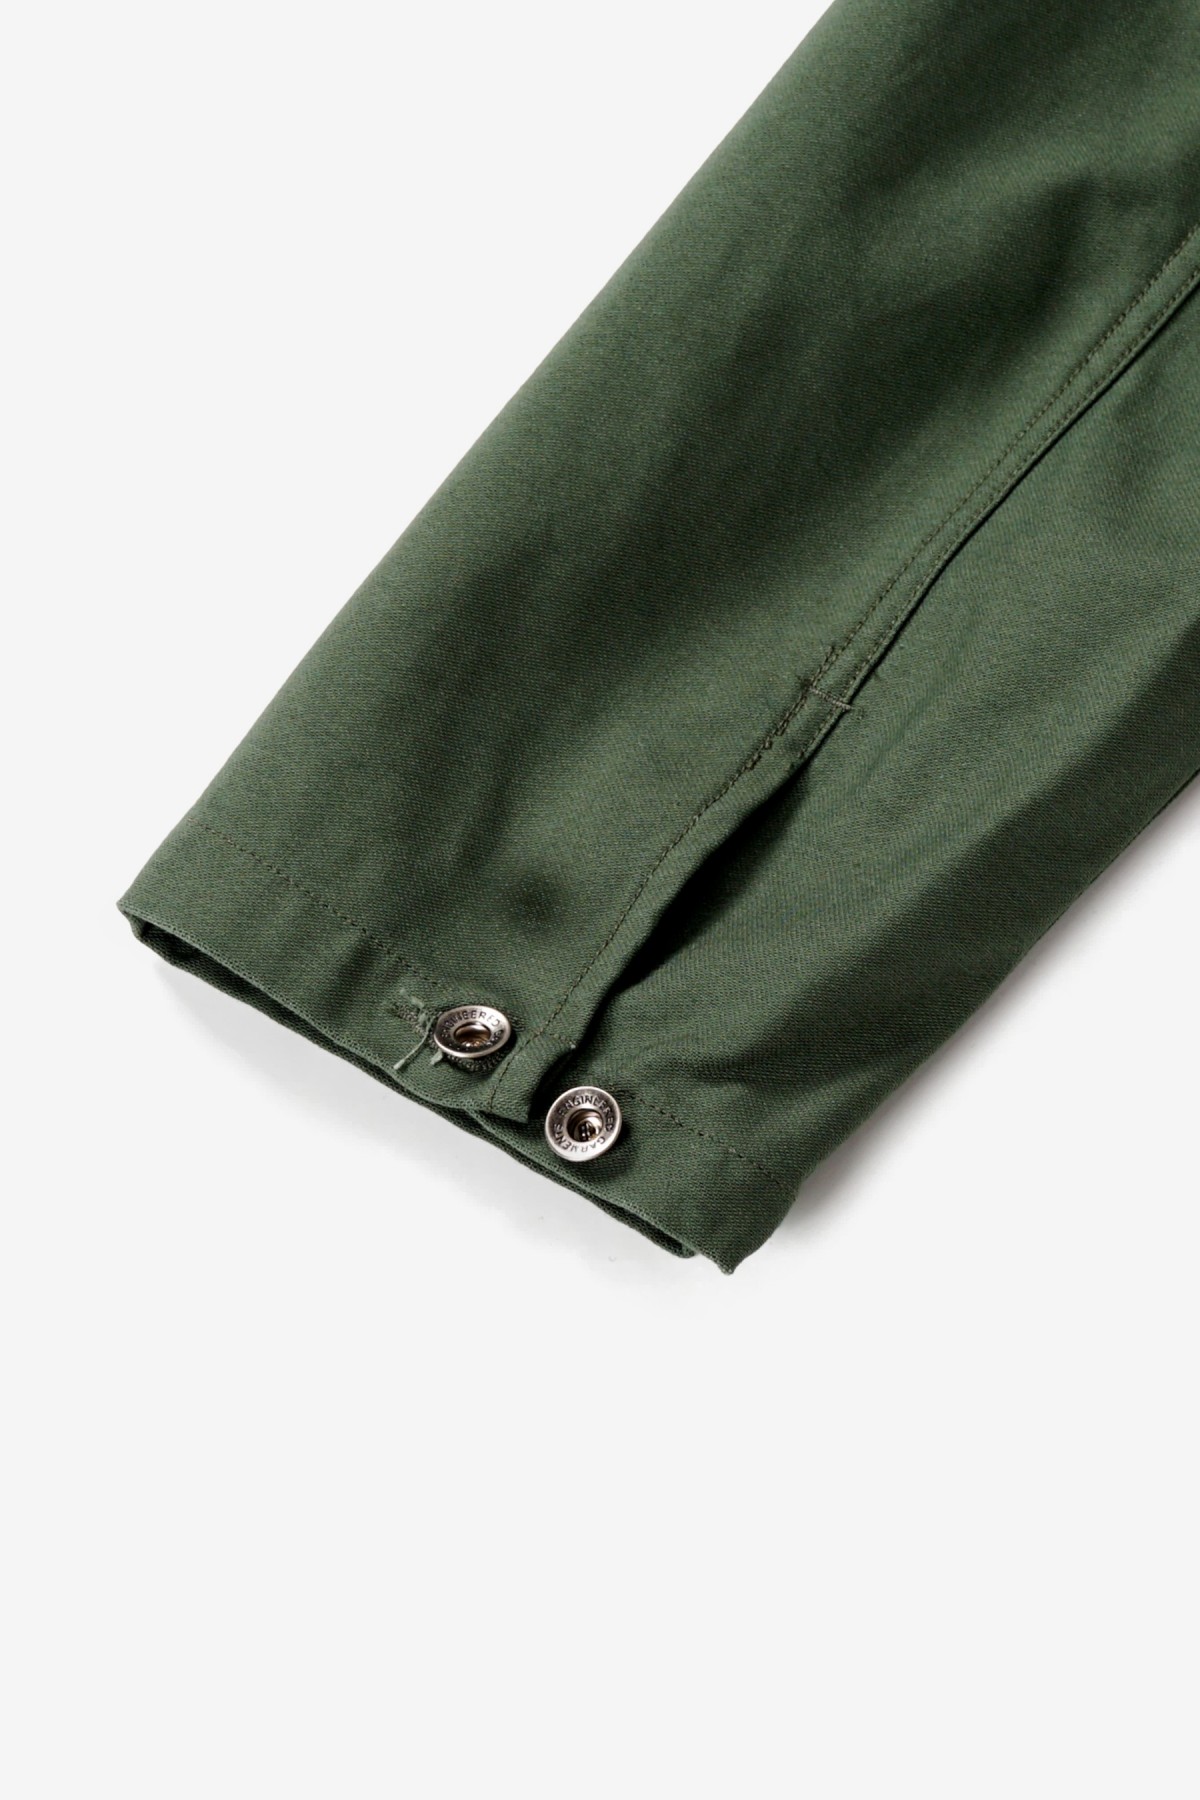 Engineered Garments Workaday Army Shirt in Olive Cotton Reverse Sateen